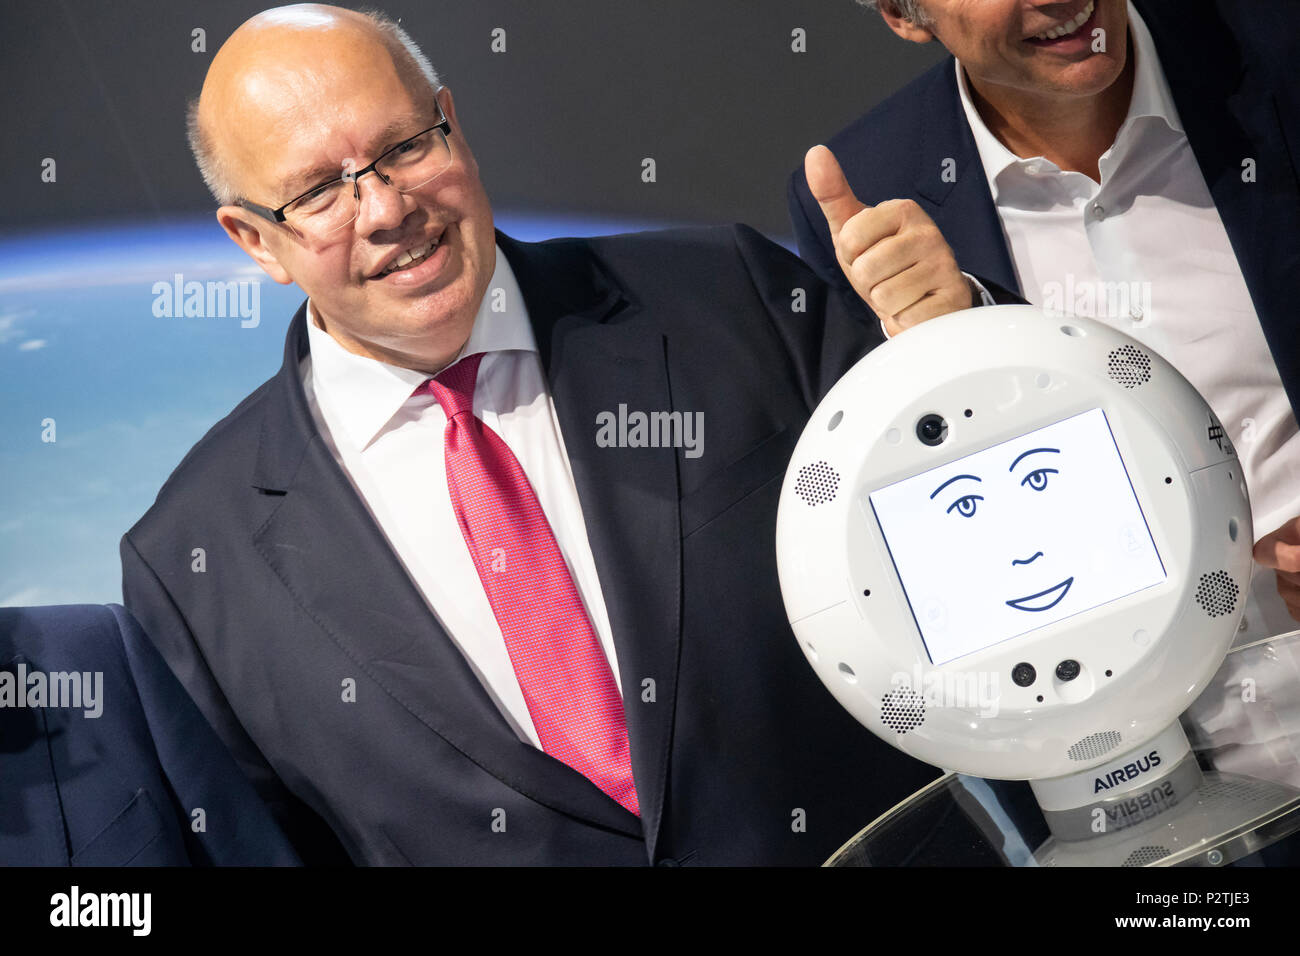 Hannover, Germany. 12th June, 2018. IT-expo CEBIT 2018 opening walk with Peter Altmaier, Federal Minister for Economic Affairs and Energy Germany. Here at IBM booth, presenting robot CIMON (Crew Interactive Mobile CompaniON), an intelligent, mobile and interactive astronaut assistance system, developed by Airbus on behalf of German Aerospace Center (DLR), using IBM Watson technology, tested on ISS as part of Horizons mission of European Space Agency (ESA). Credit: Christian Lademann Stock Photo